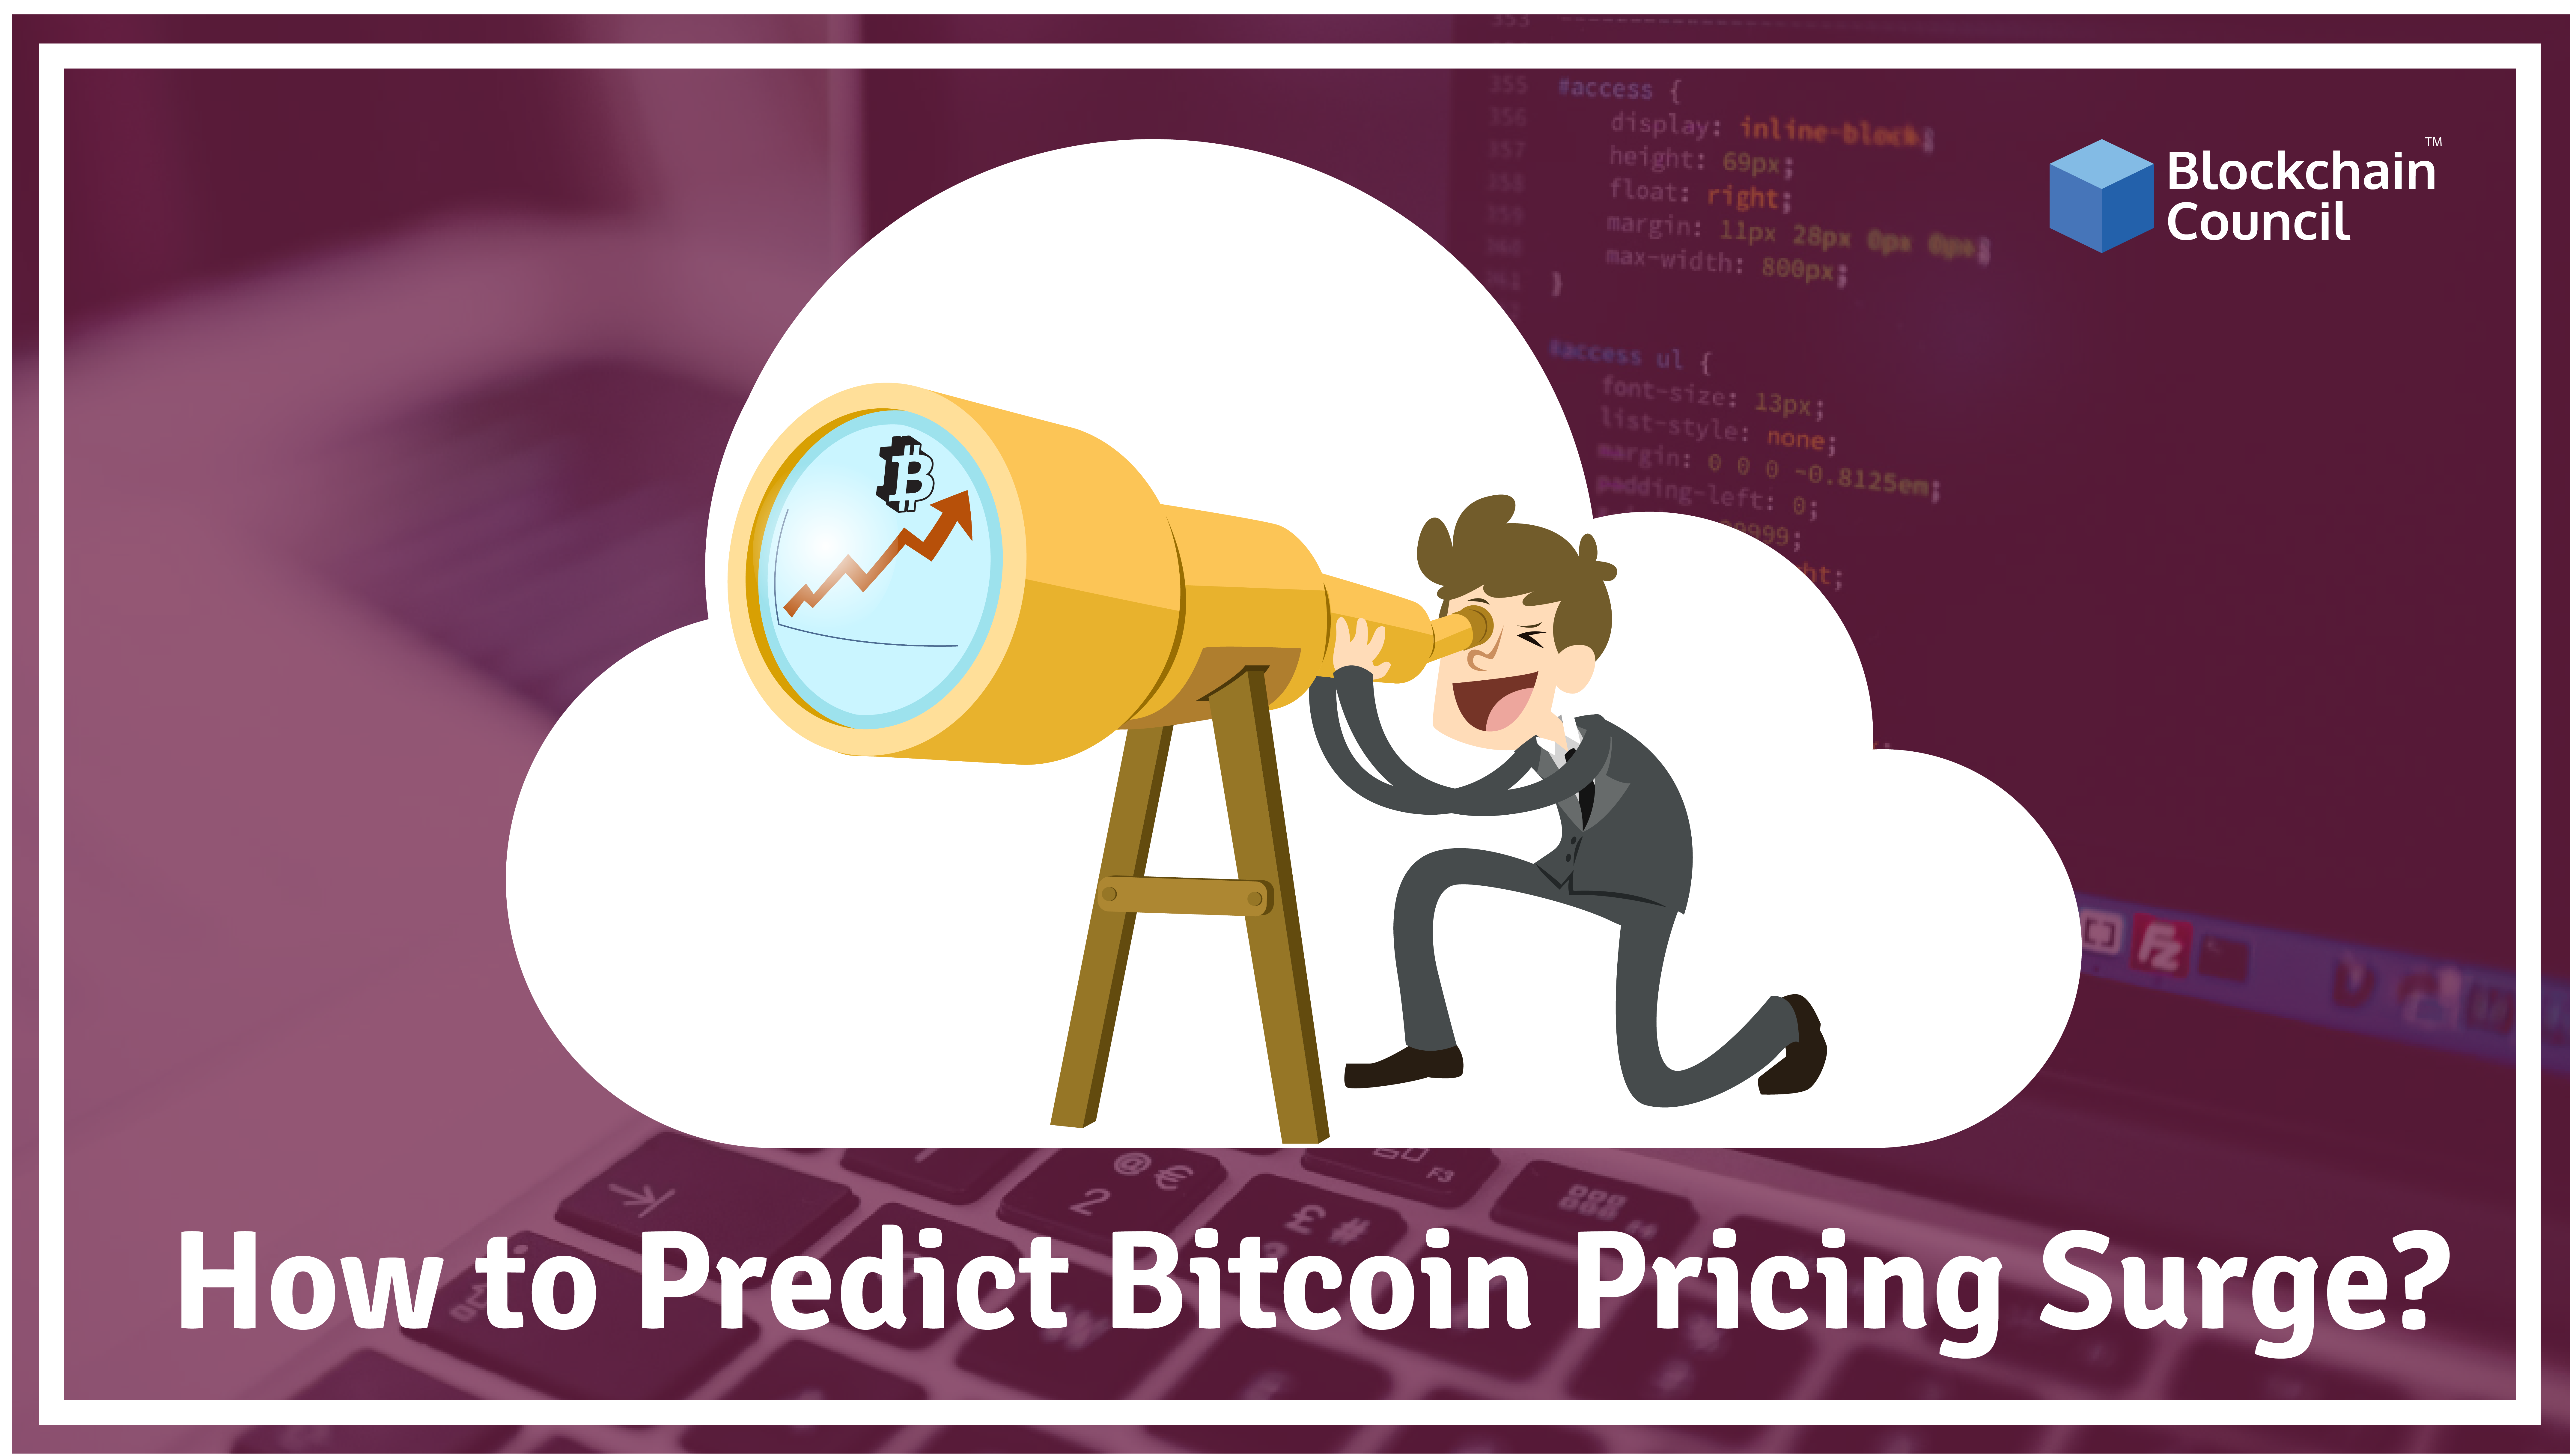 is buying partial bitcoins worth it 2019 site www.reddit.com